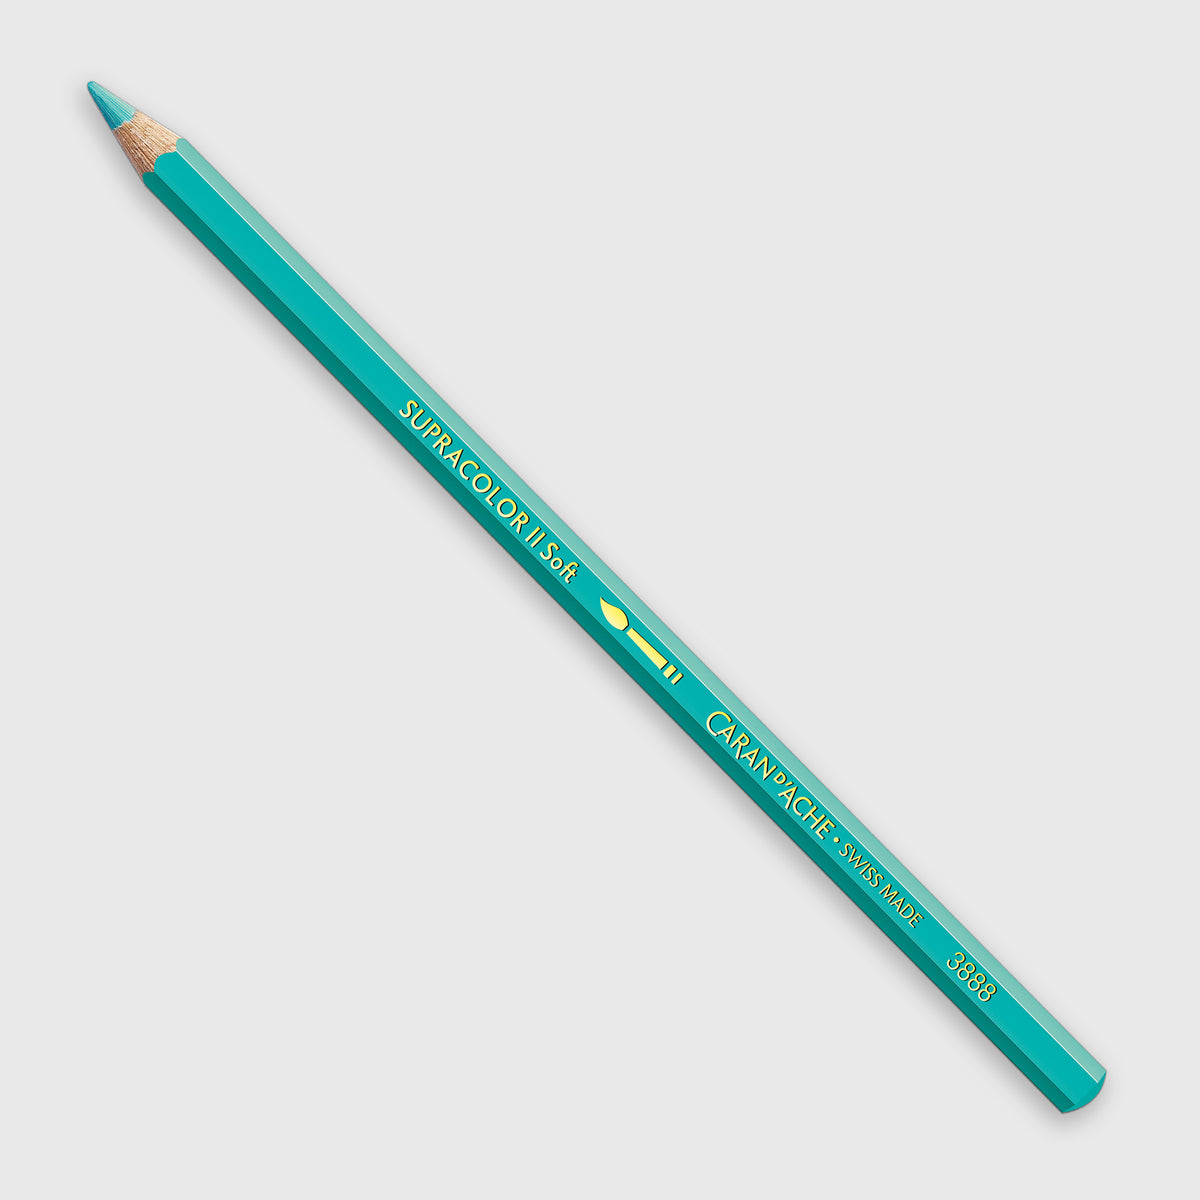 Caran d'Ache Supracolor 191 Turquoise Green